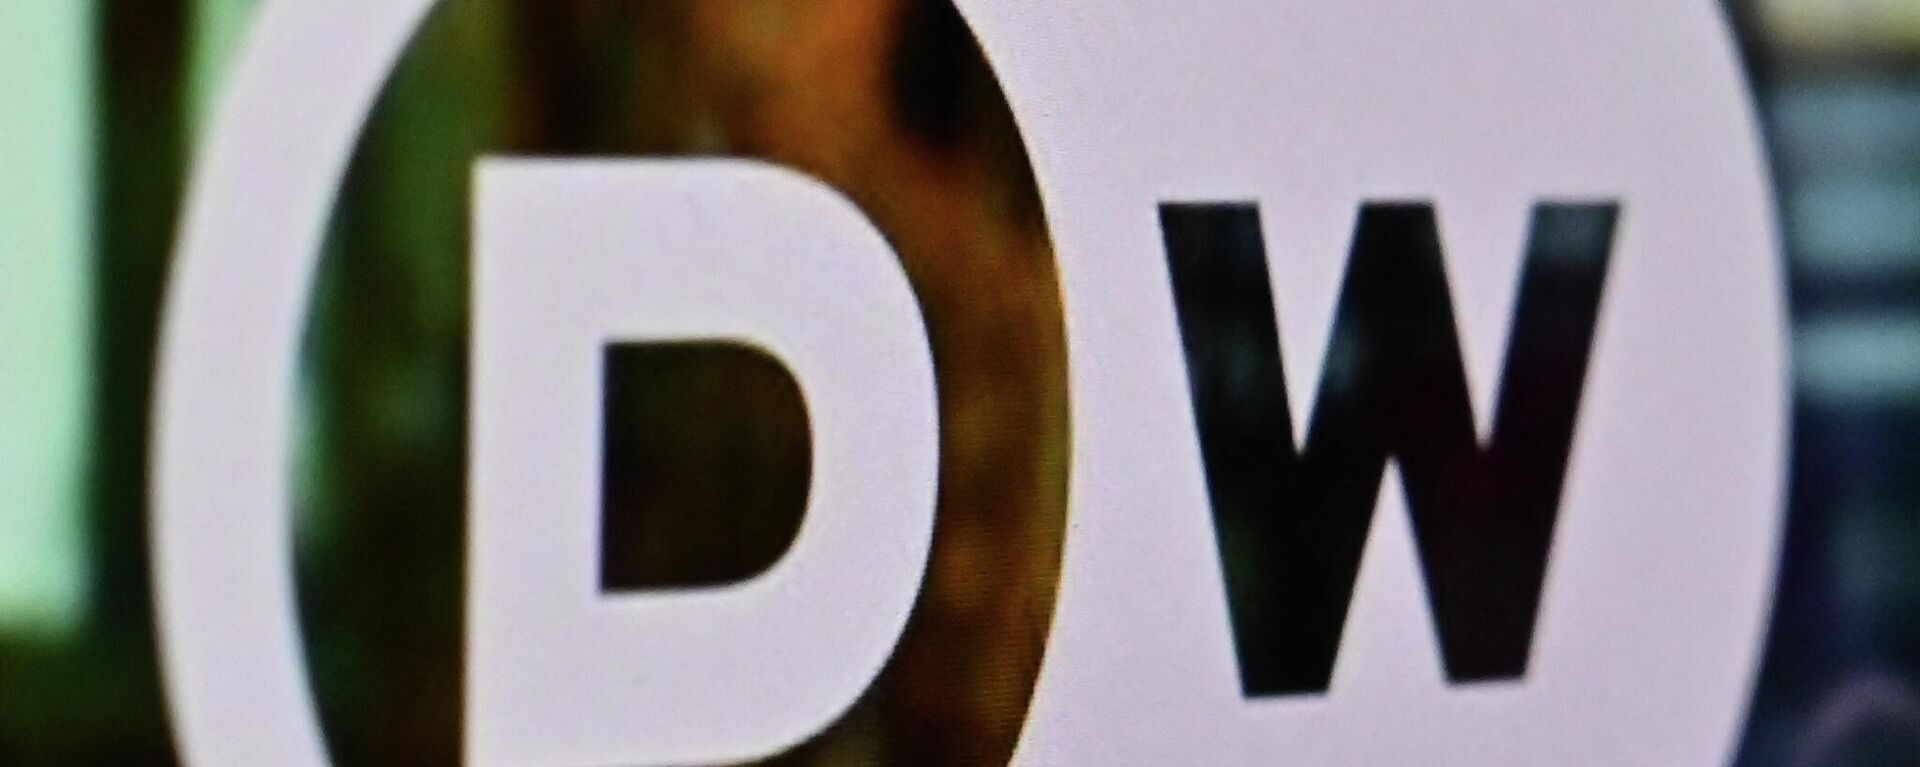 A photograph taken on February 3, 2022, shows the logo of German broadcaster Deutsche Welle displayed on a computer screen in Moscow. - Sputnik International, 1920, 04.02.2022